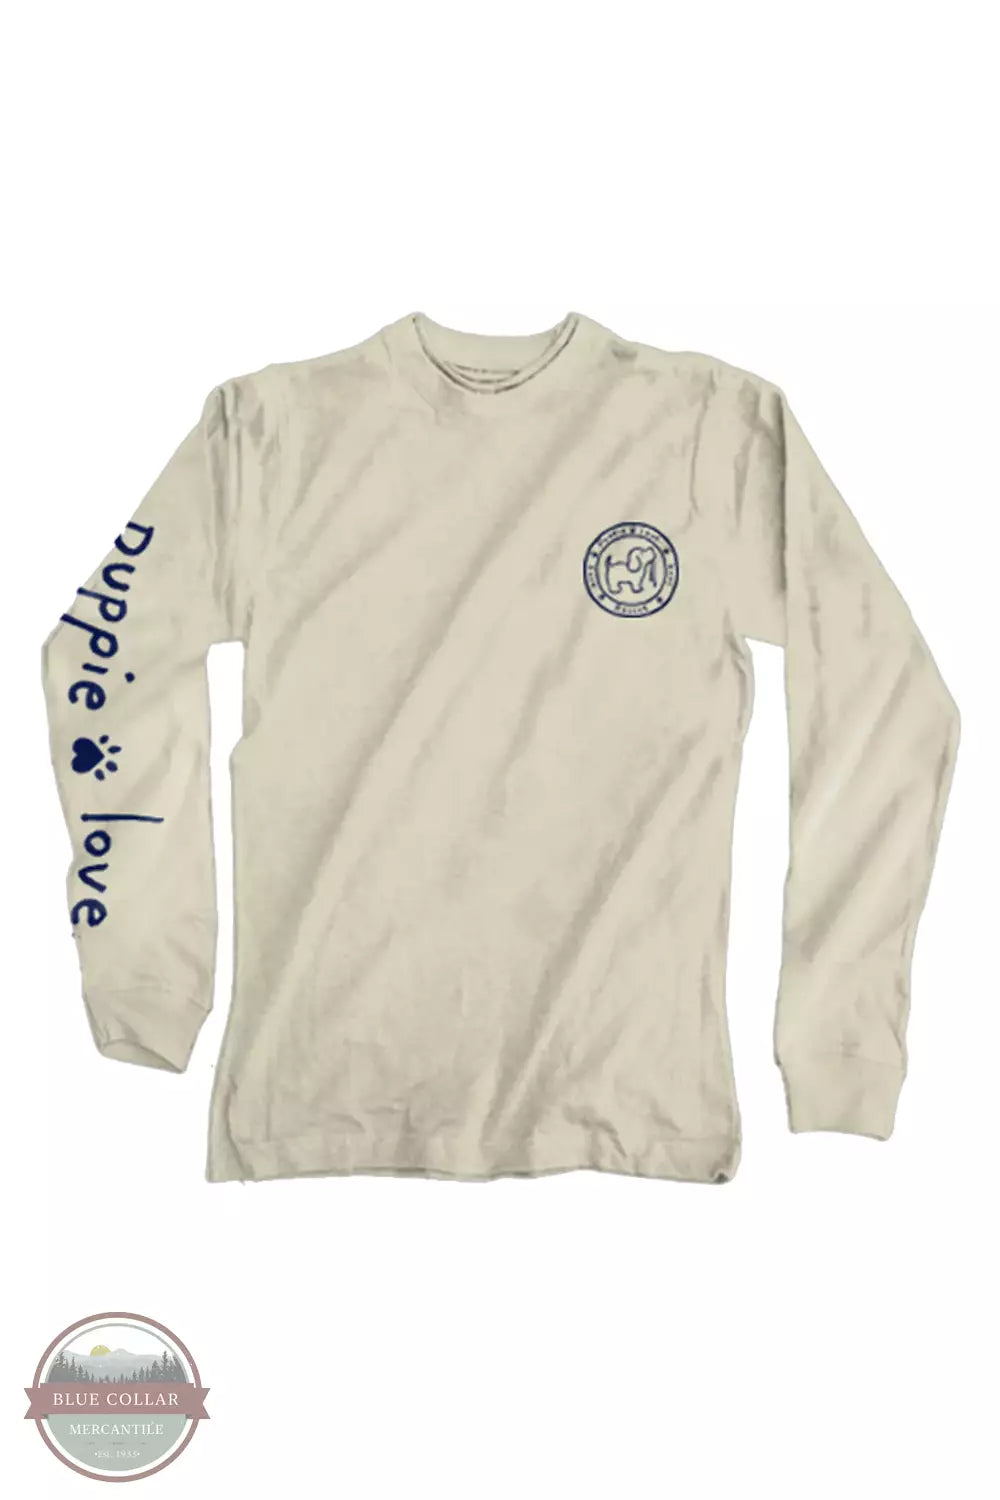 Puppie Love SPL1290 High Tides and Good Vibes Long Sleeve T-Shirt in Sand Front View